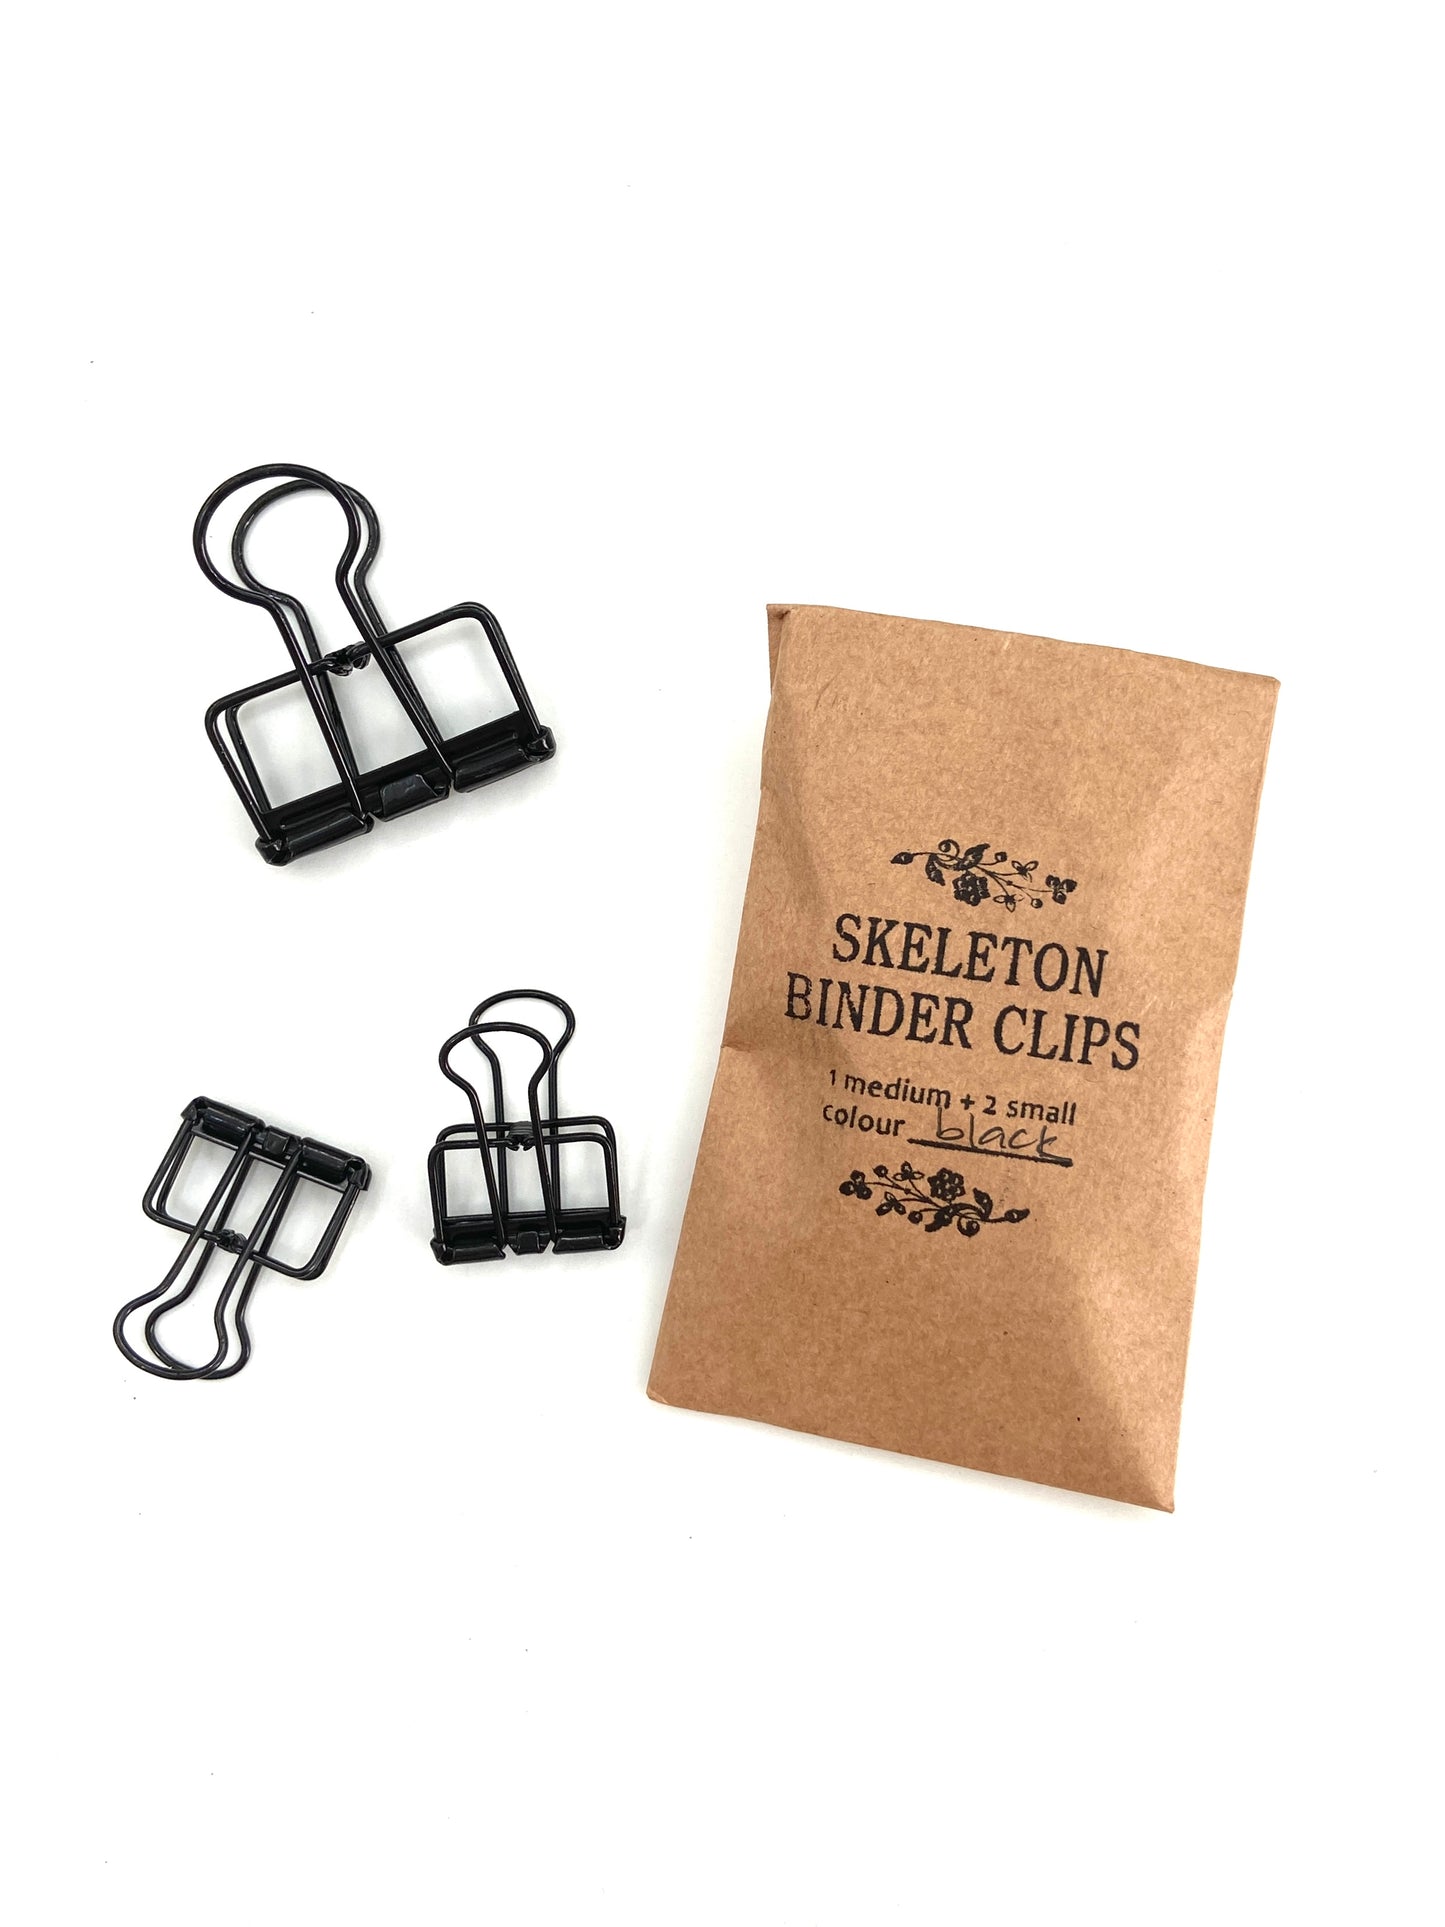 Skeleton binder clips small and medium, online stationery store